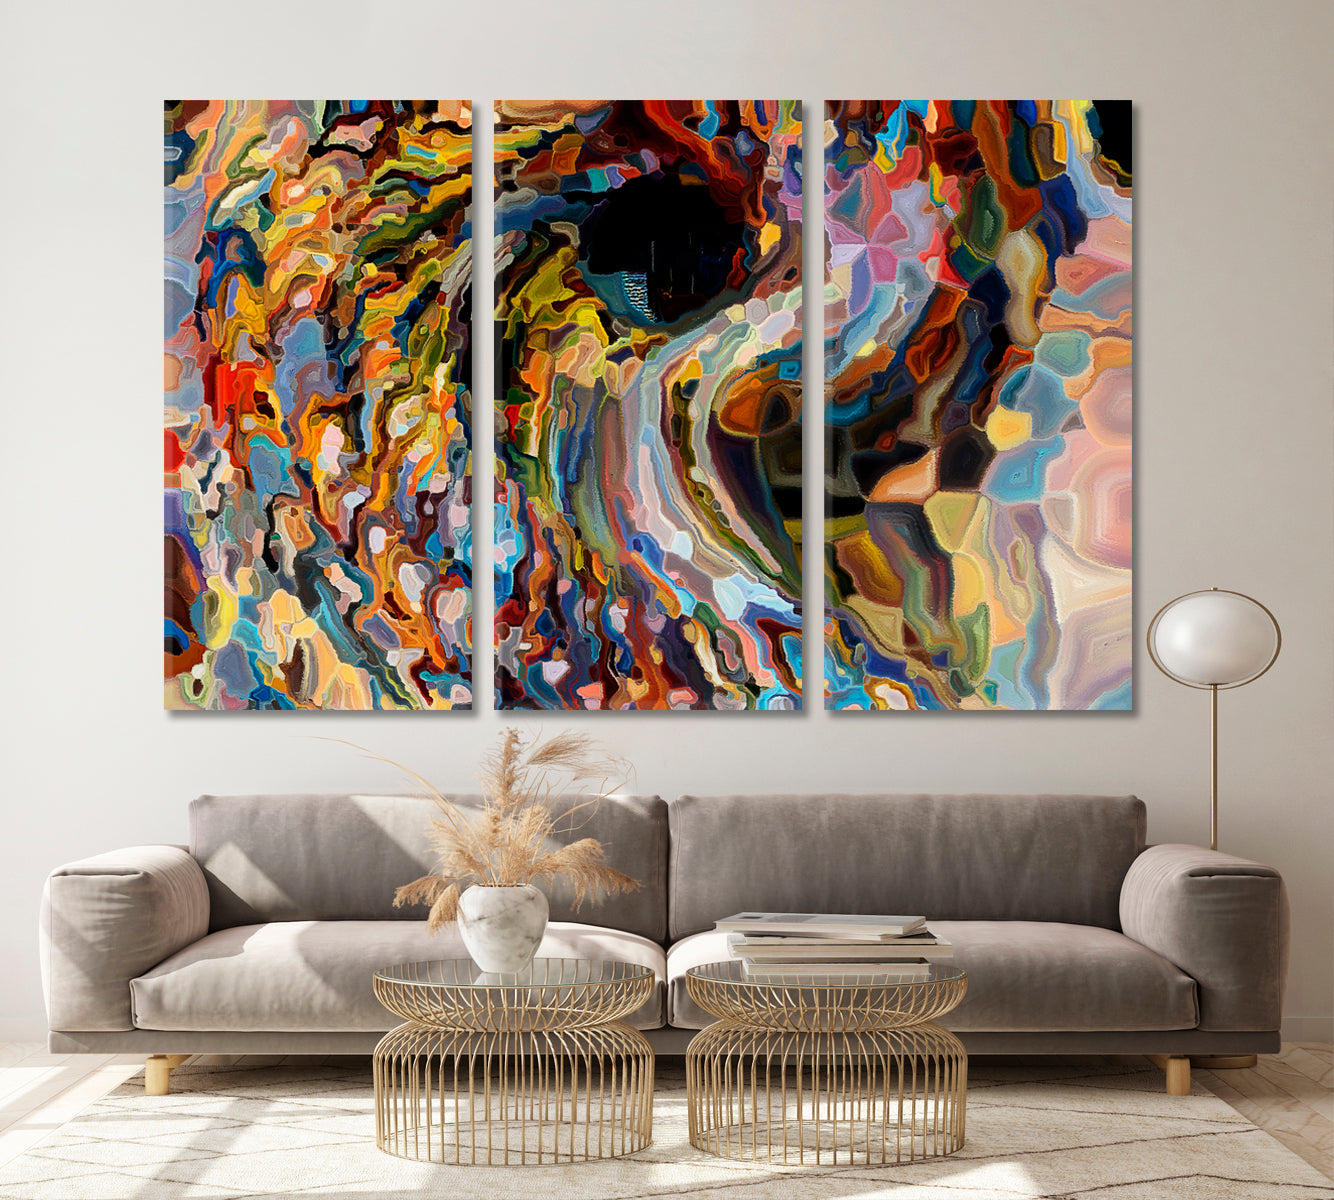 PAINTS VIRTUAL WHIRLPOOL  Unique Abstract Art Abstract Art Print Artesty 3 panels 36" x 24" 